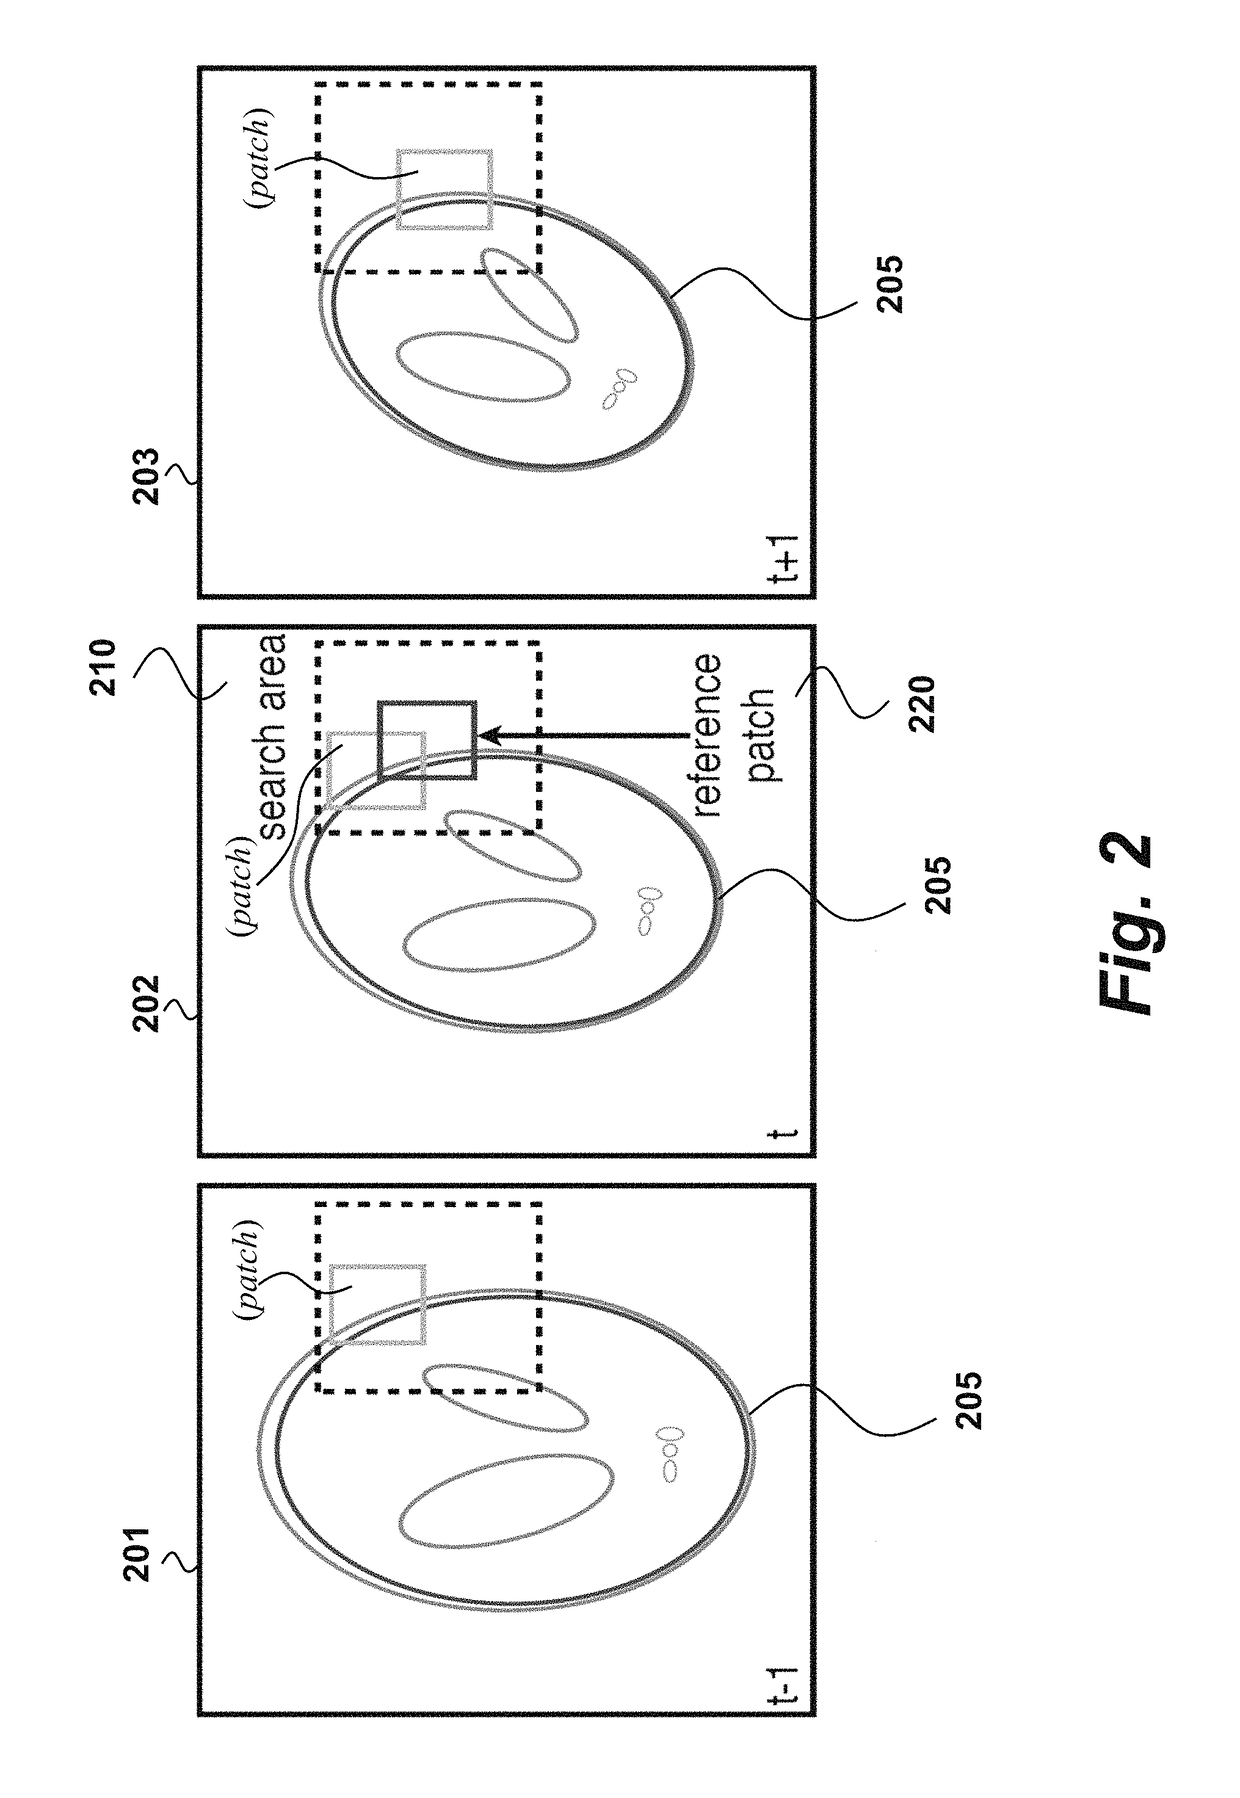 Method and system for motion adaptive fusion of optical images and depth maps acquired by cameras and depth sensors